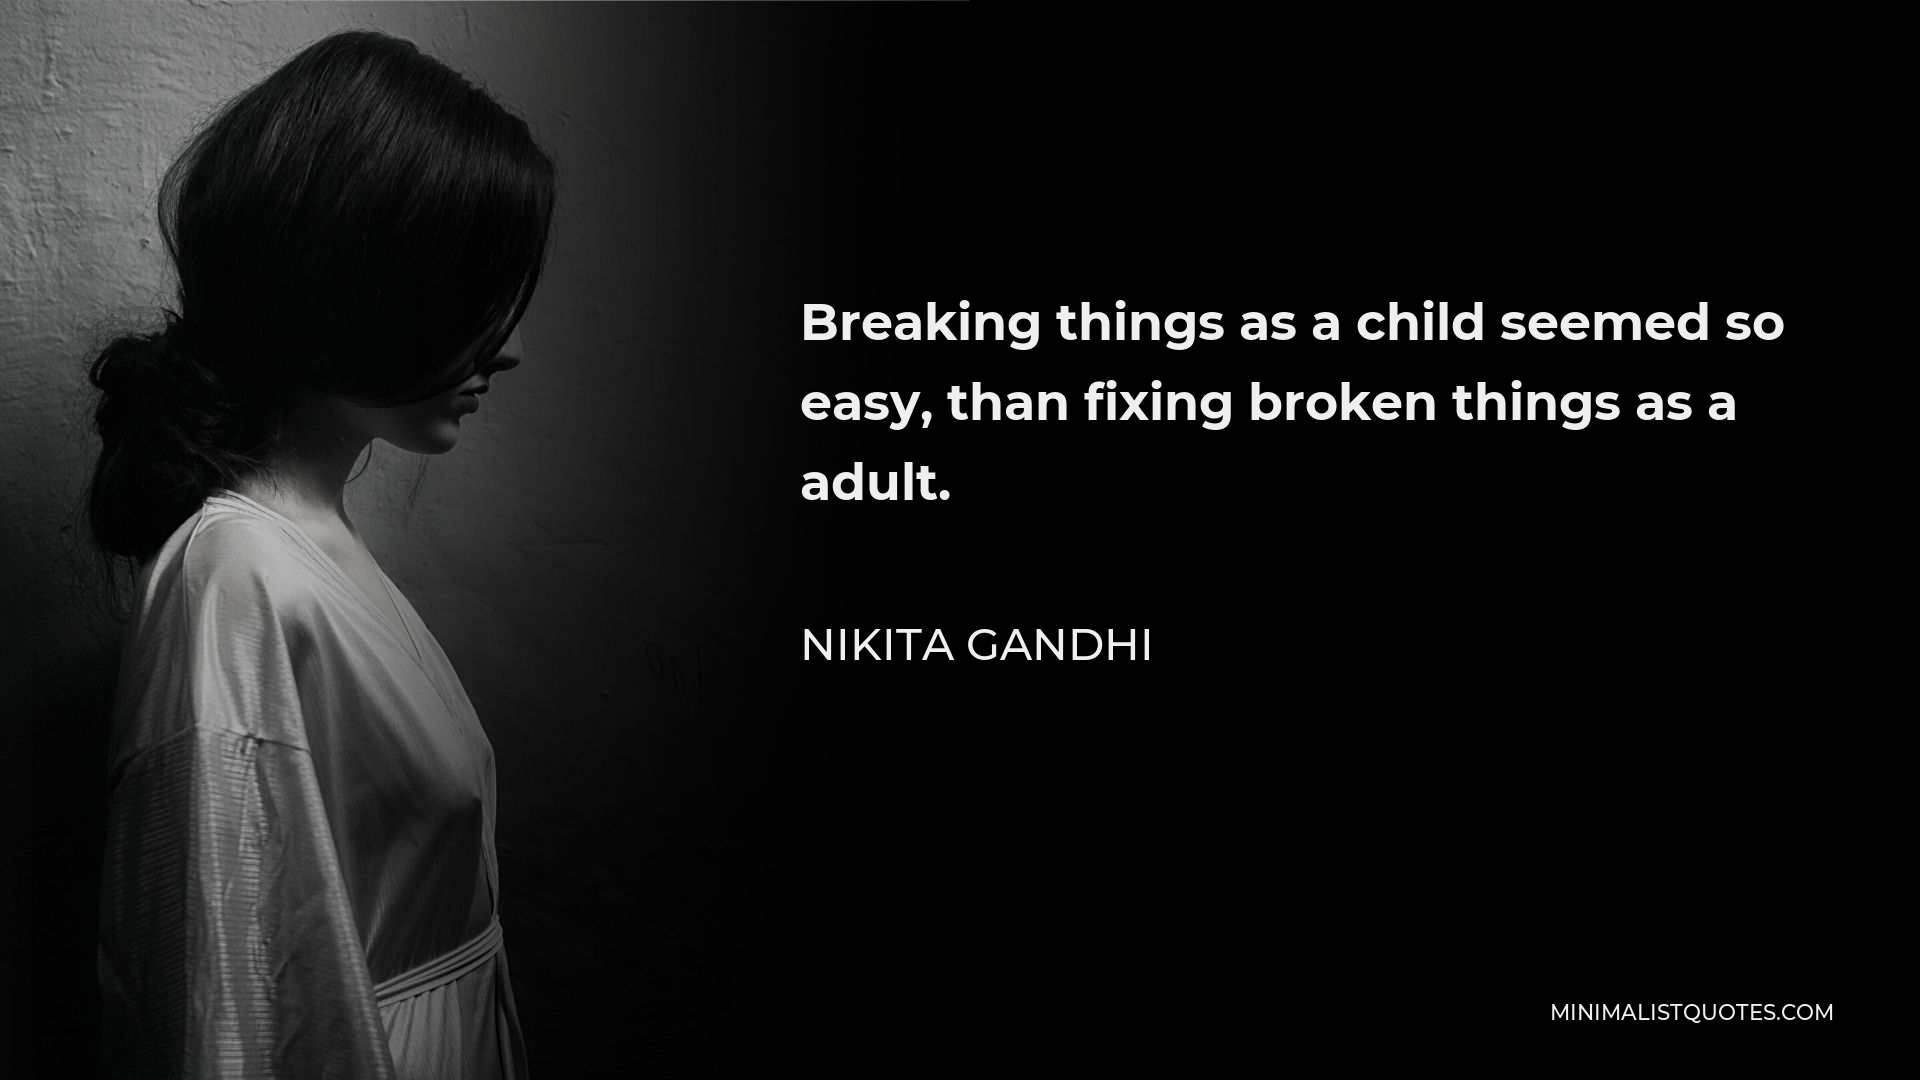 Nikita Gandhi Quote - Breaking things as a child seemed so easy, than fixing broken things as a adult.